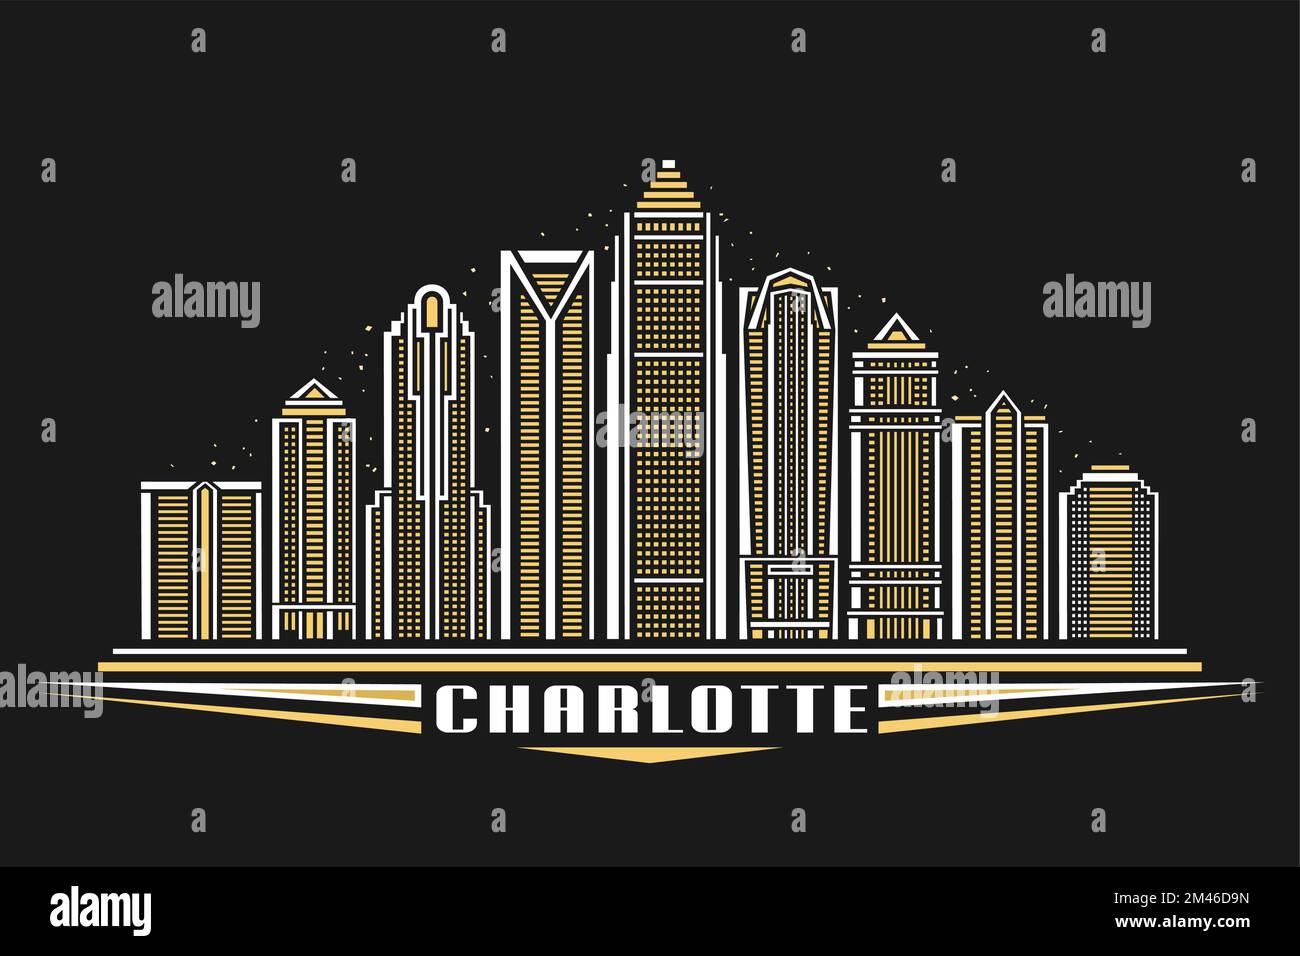 Vector illustration of Charlotte, dark poster with simple linear design famous charlotte city scape on dusk sky background, american urban line art co Stock Vector